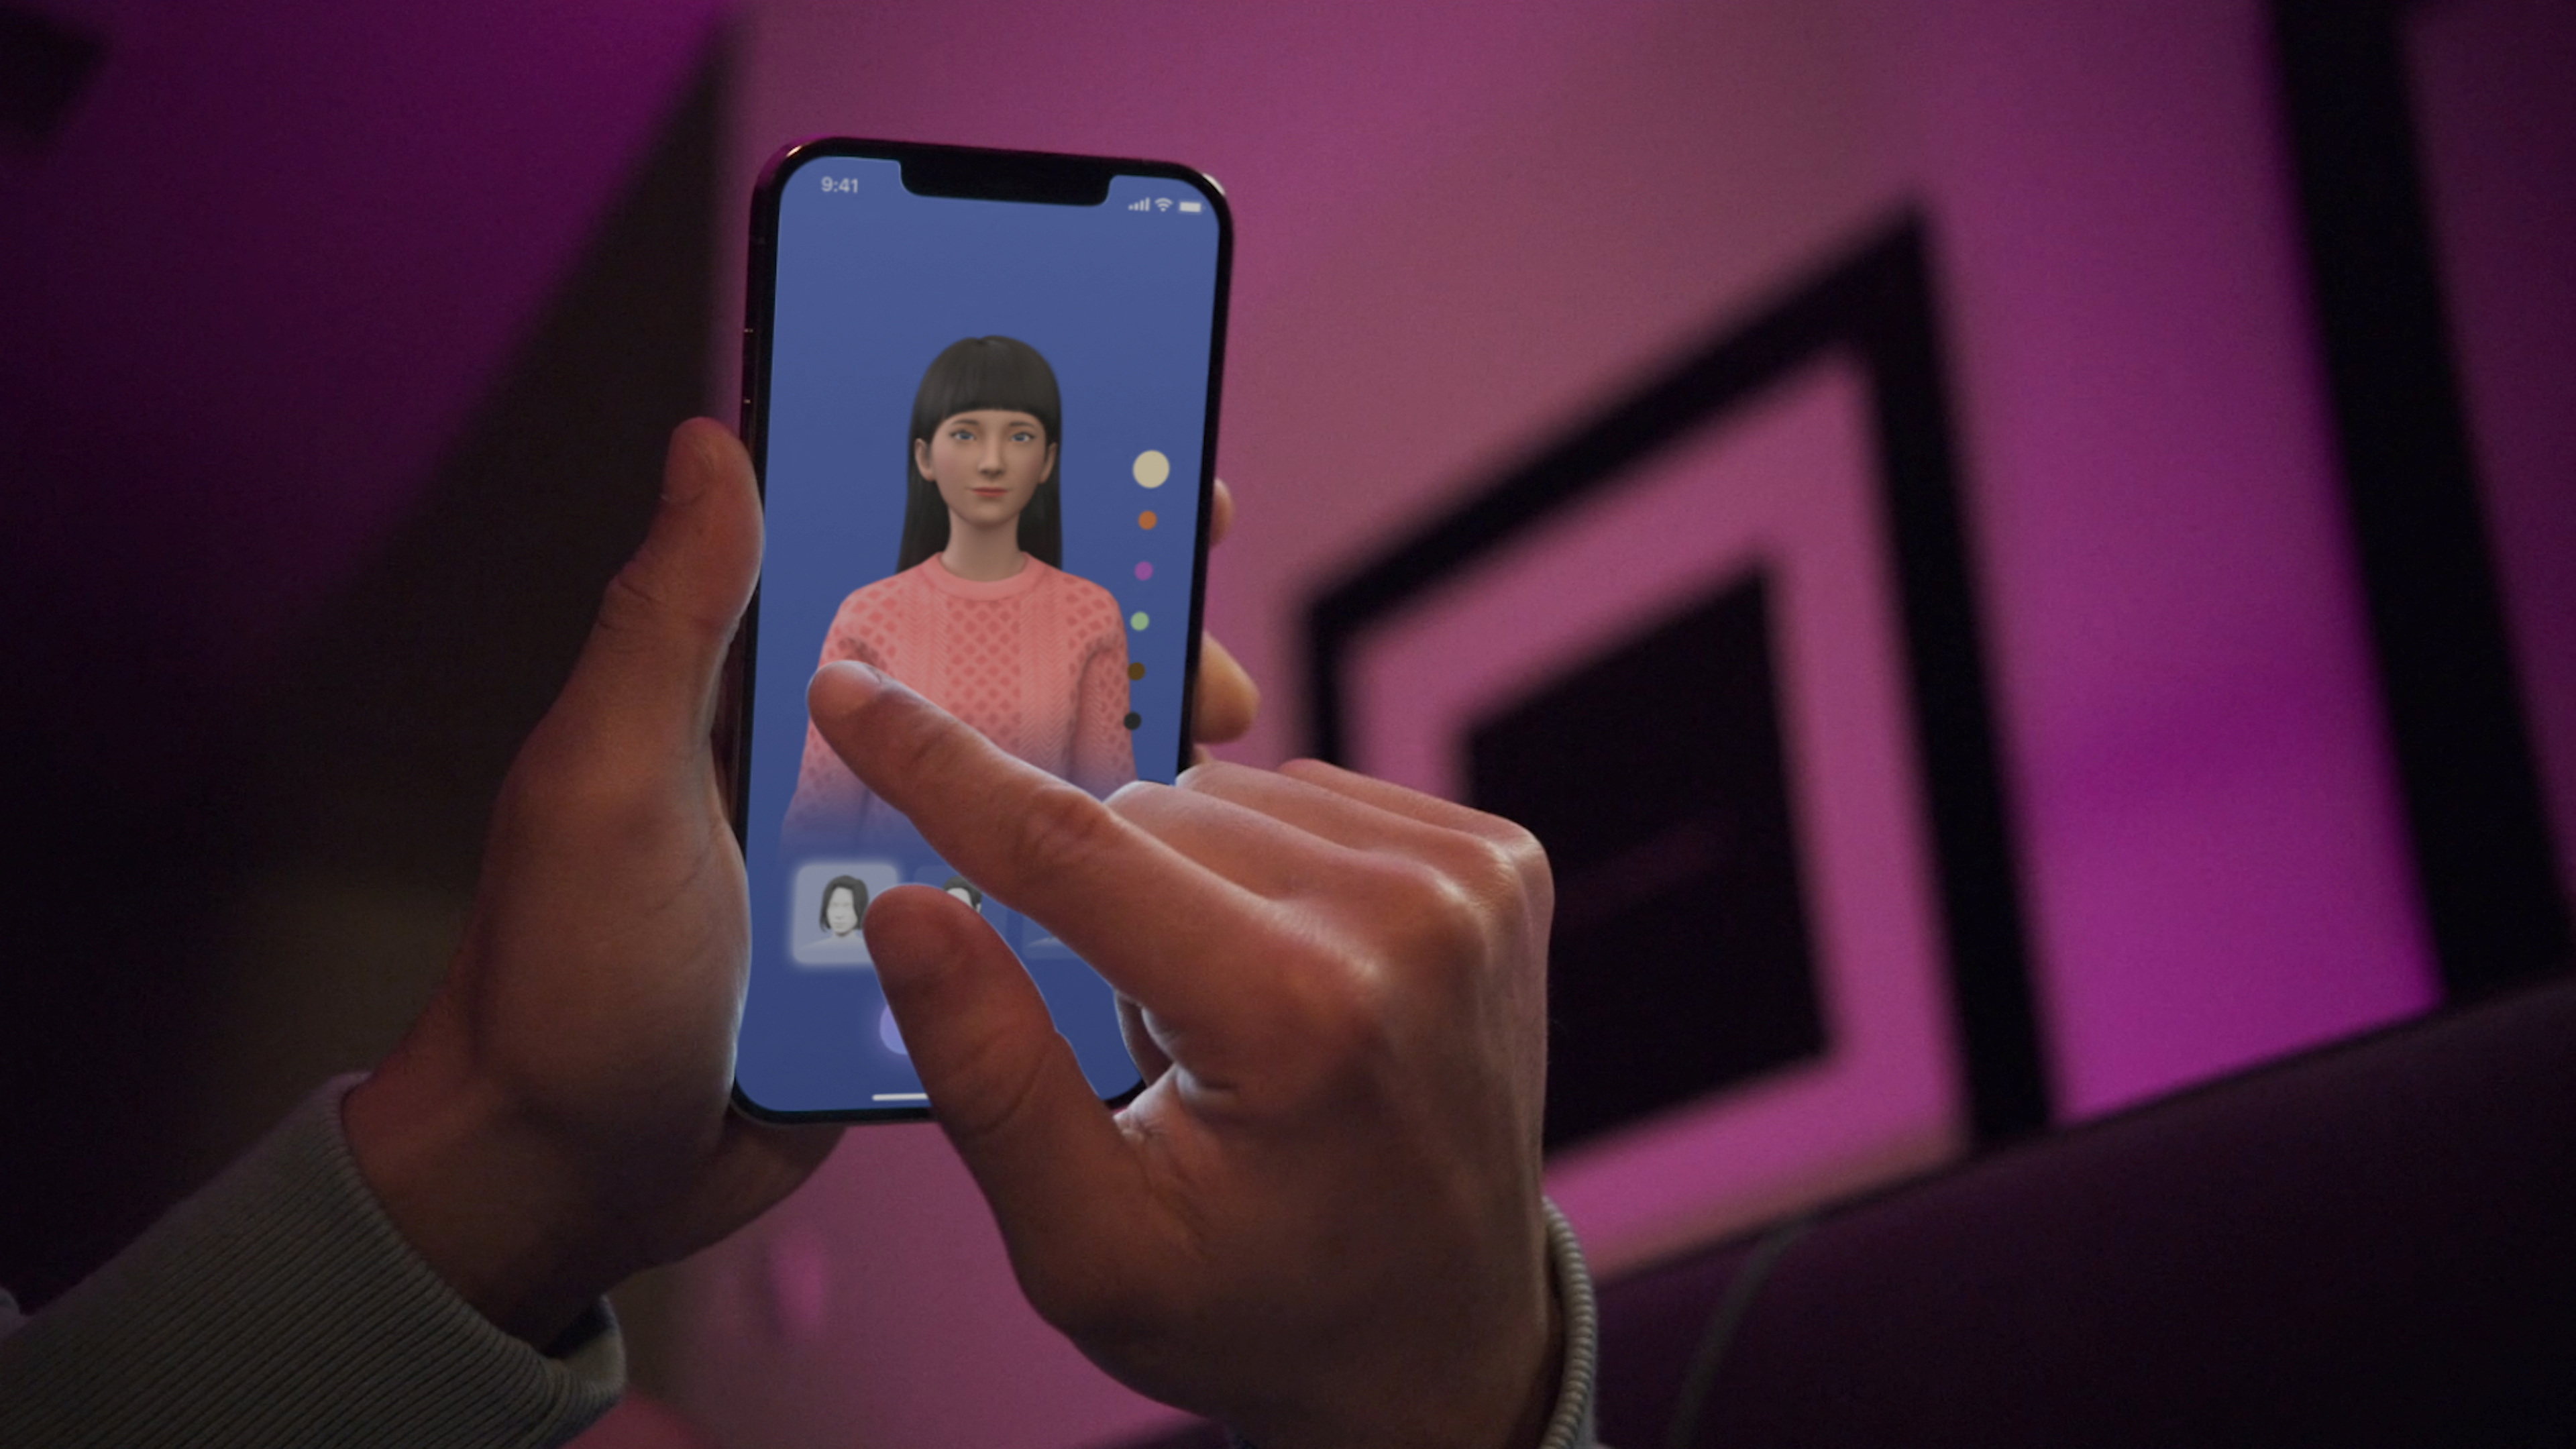 A user interacts with a smartphone app to customize an avatar for a personal artificial intelligence chatbot, known as a Replika, in San Francisco